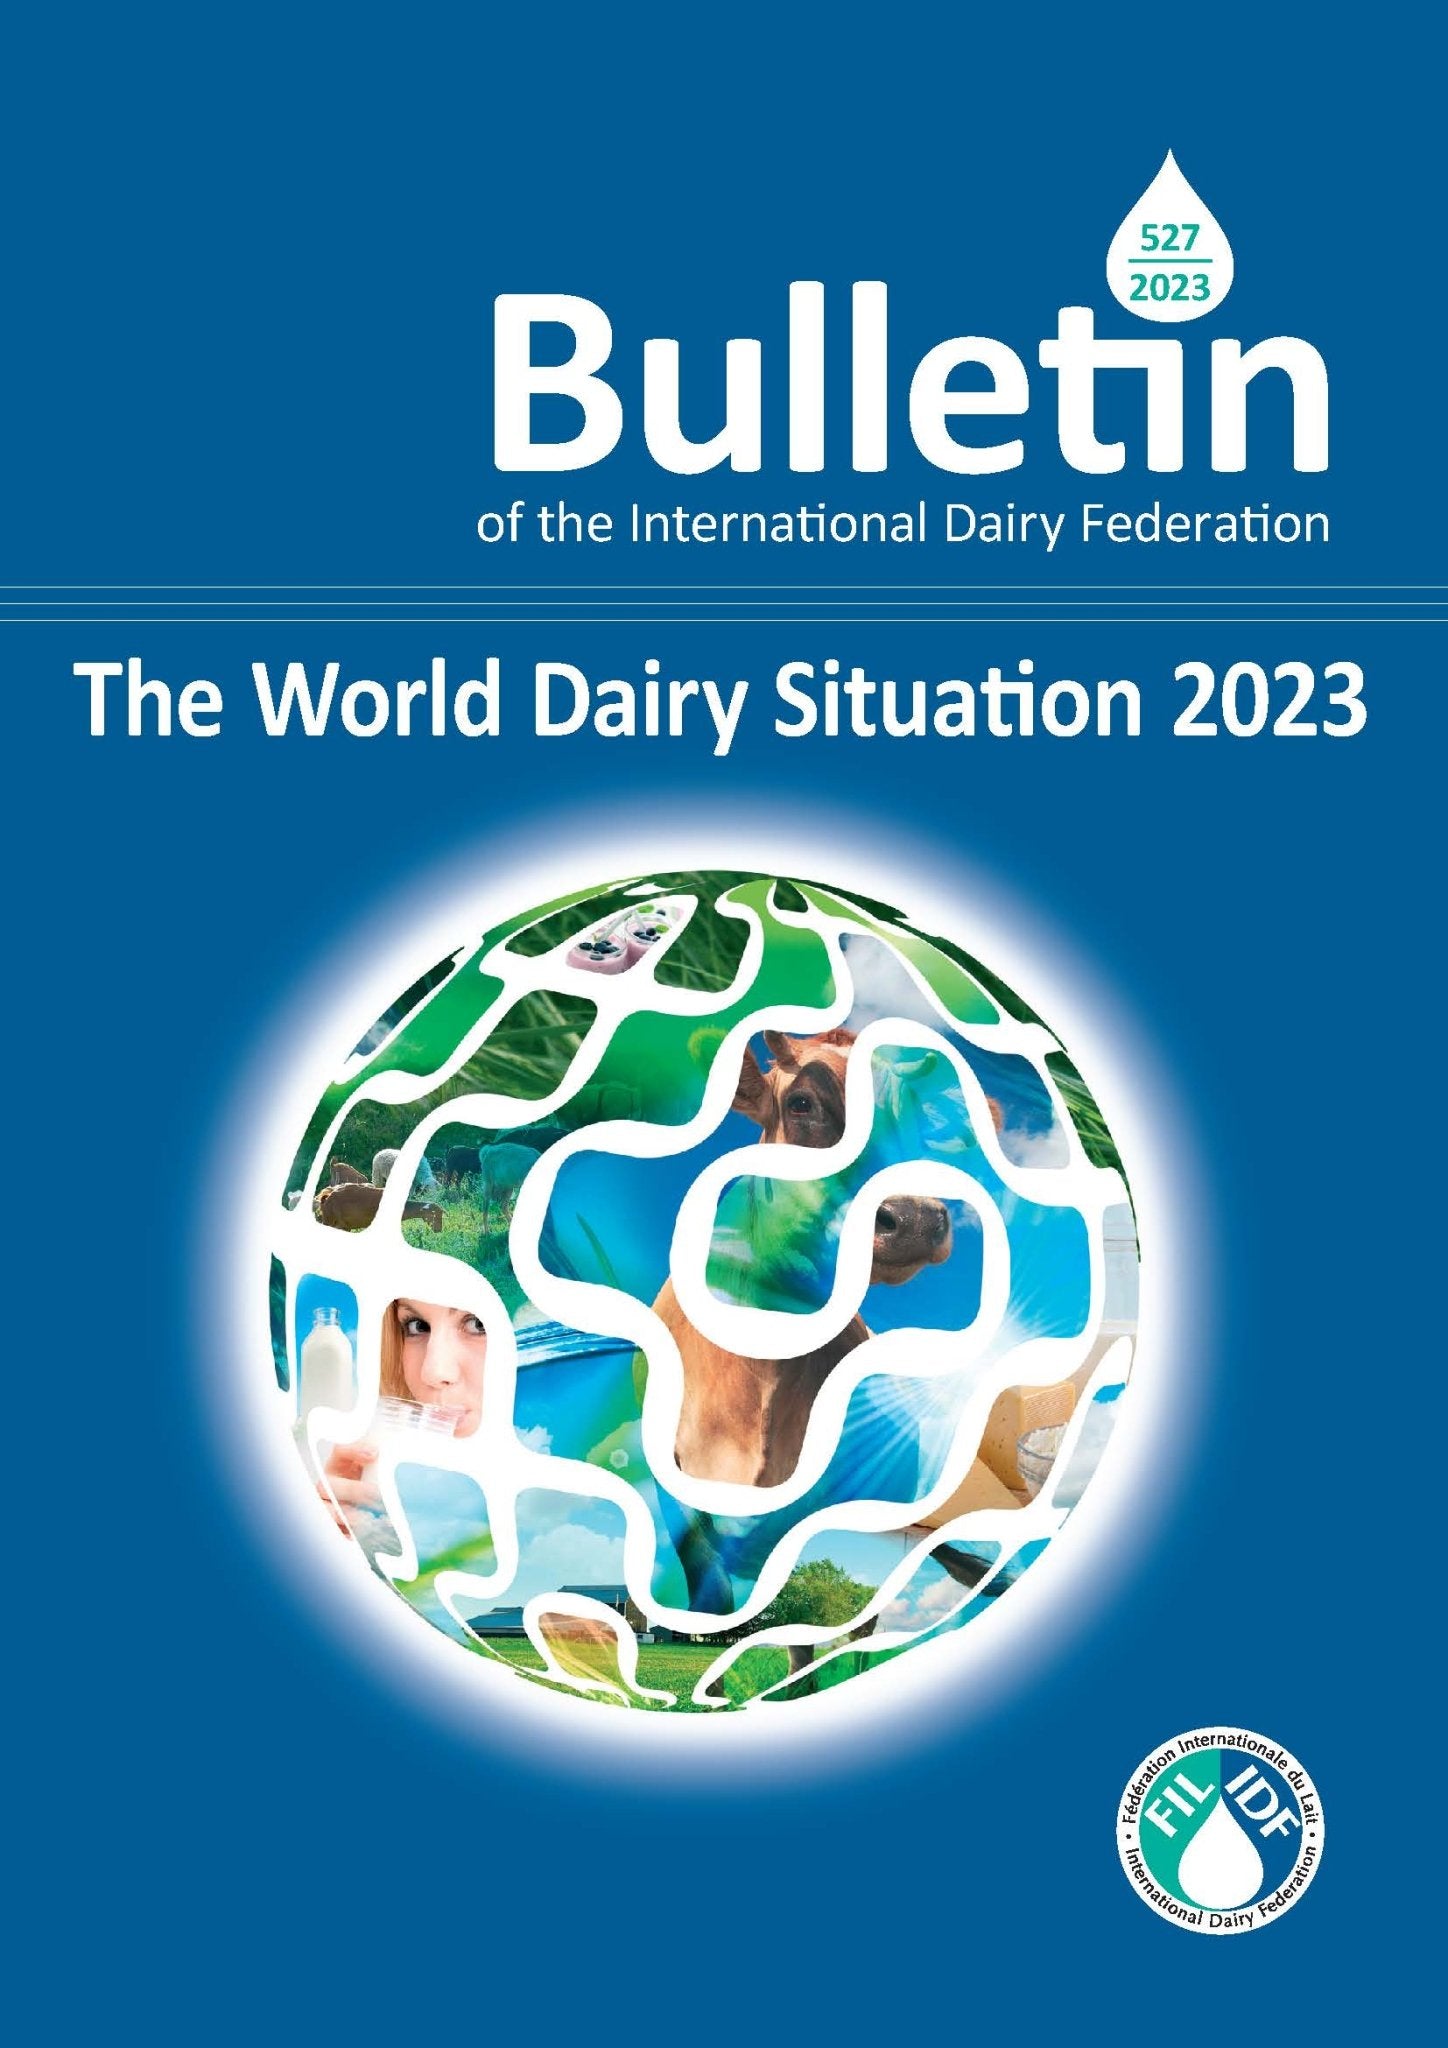 Bulletin of the IDF N°527/2023: The World Dairy Situation Report 2023 - FIL-IDF